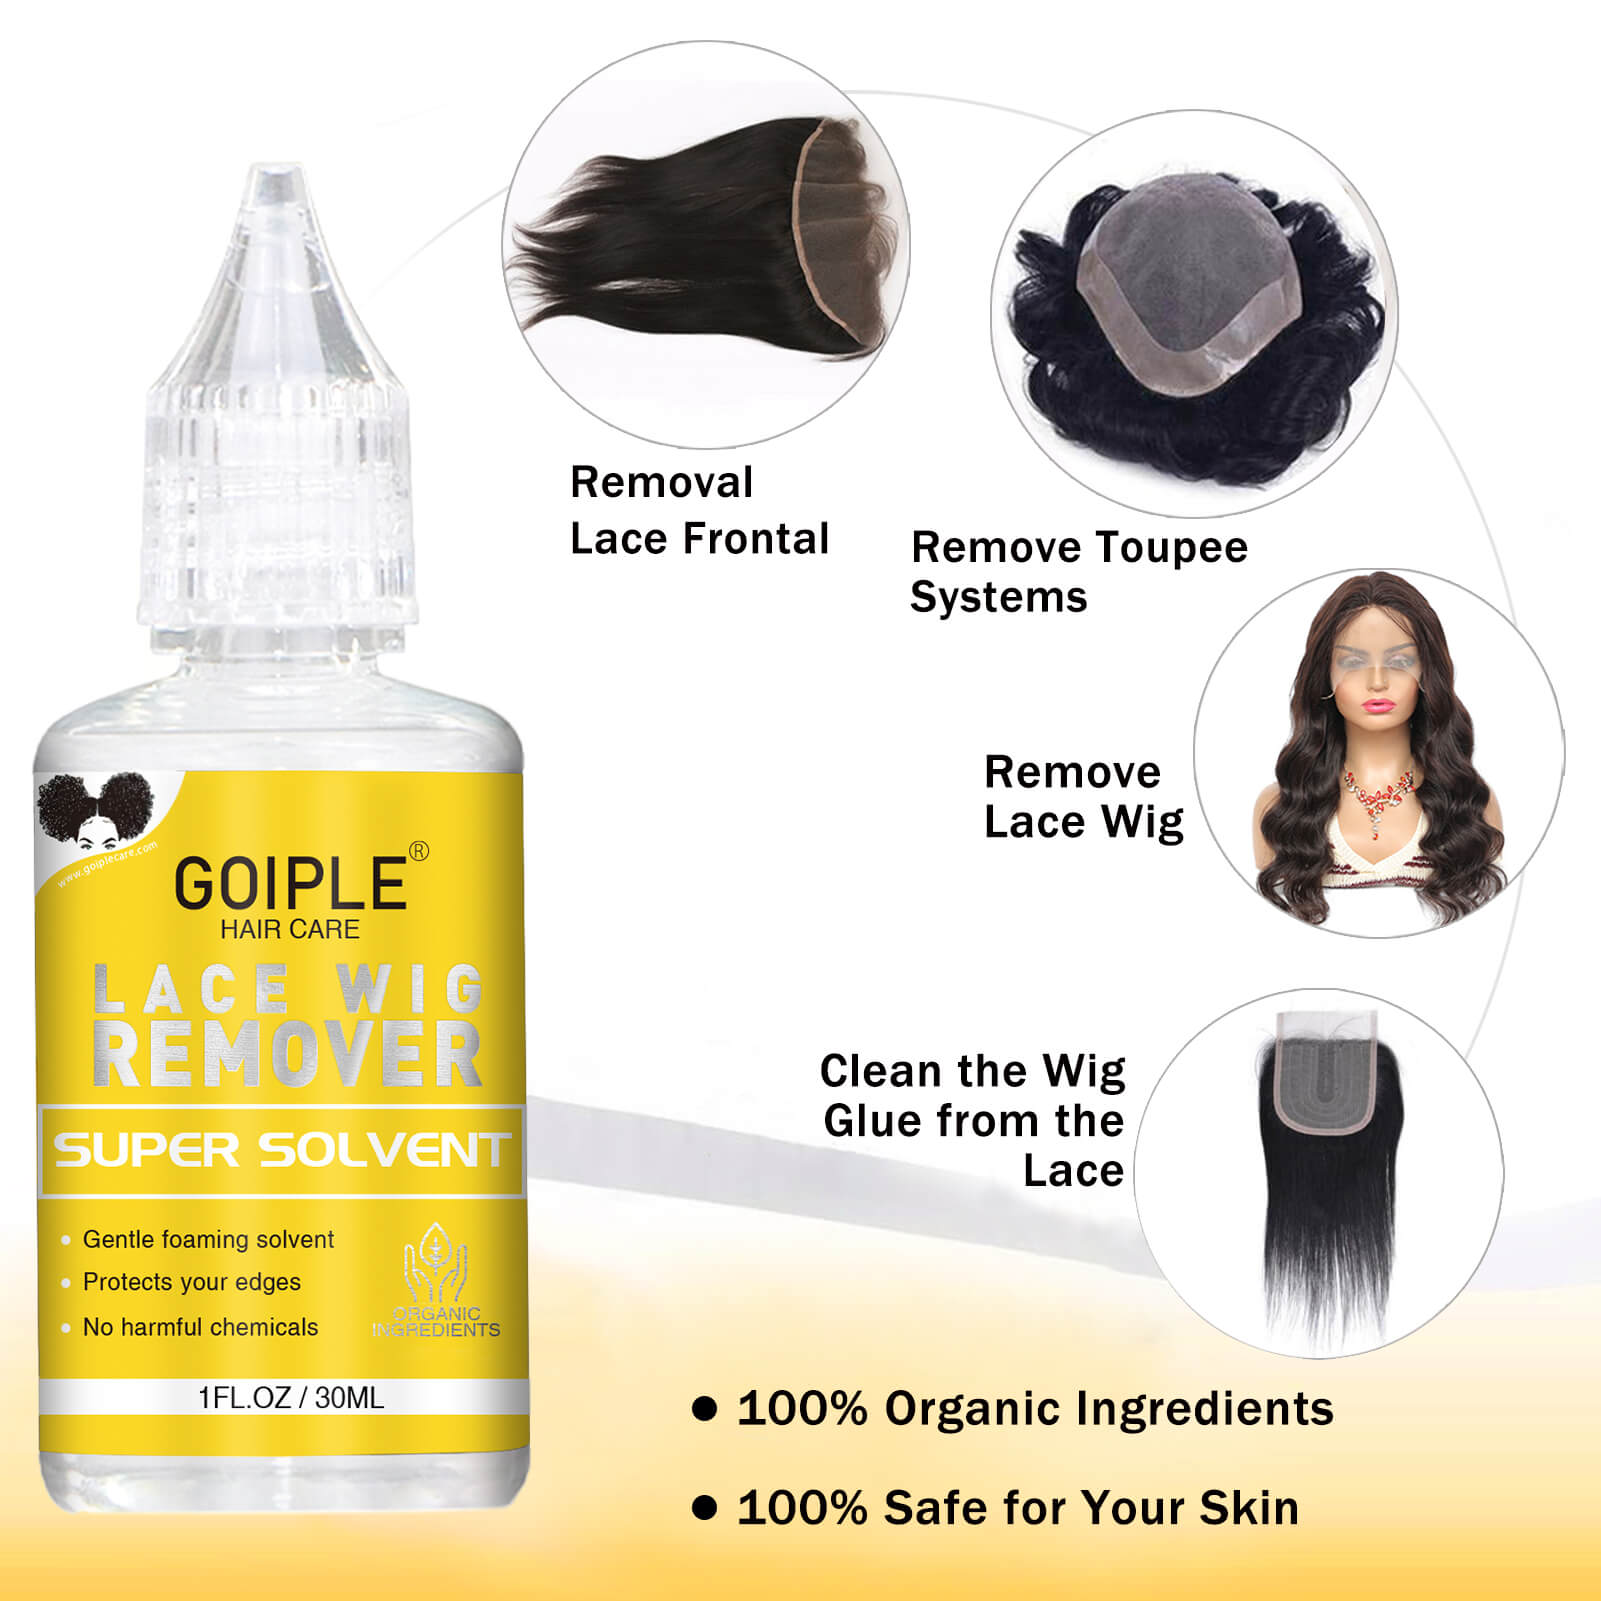 Crystal Face Roller Lace Glue Hair Product Series Adhesive Wig Glue Wig